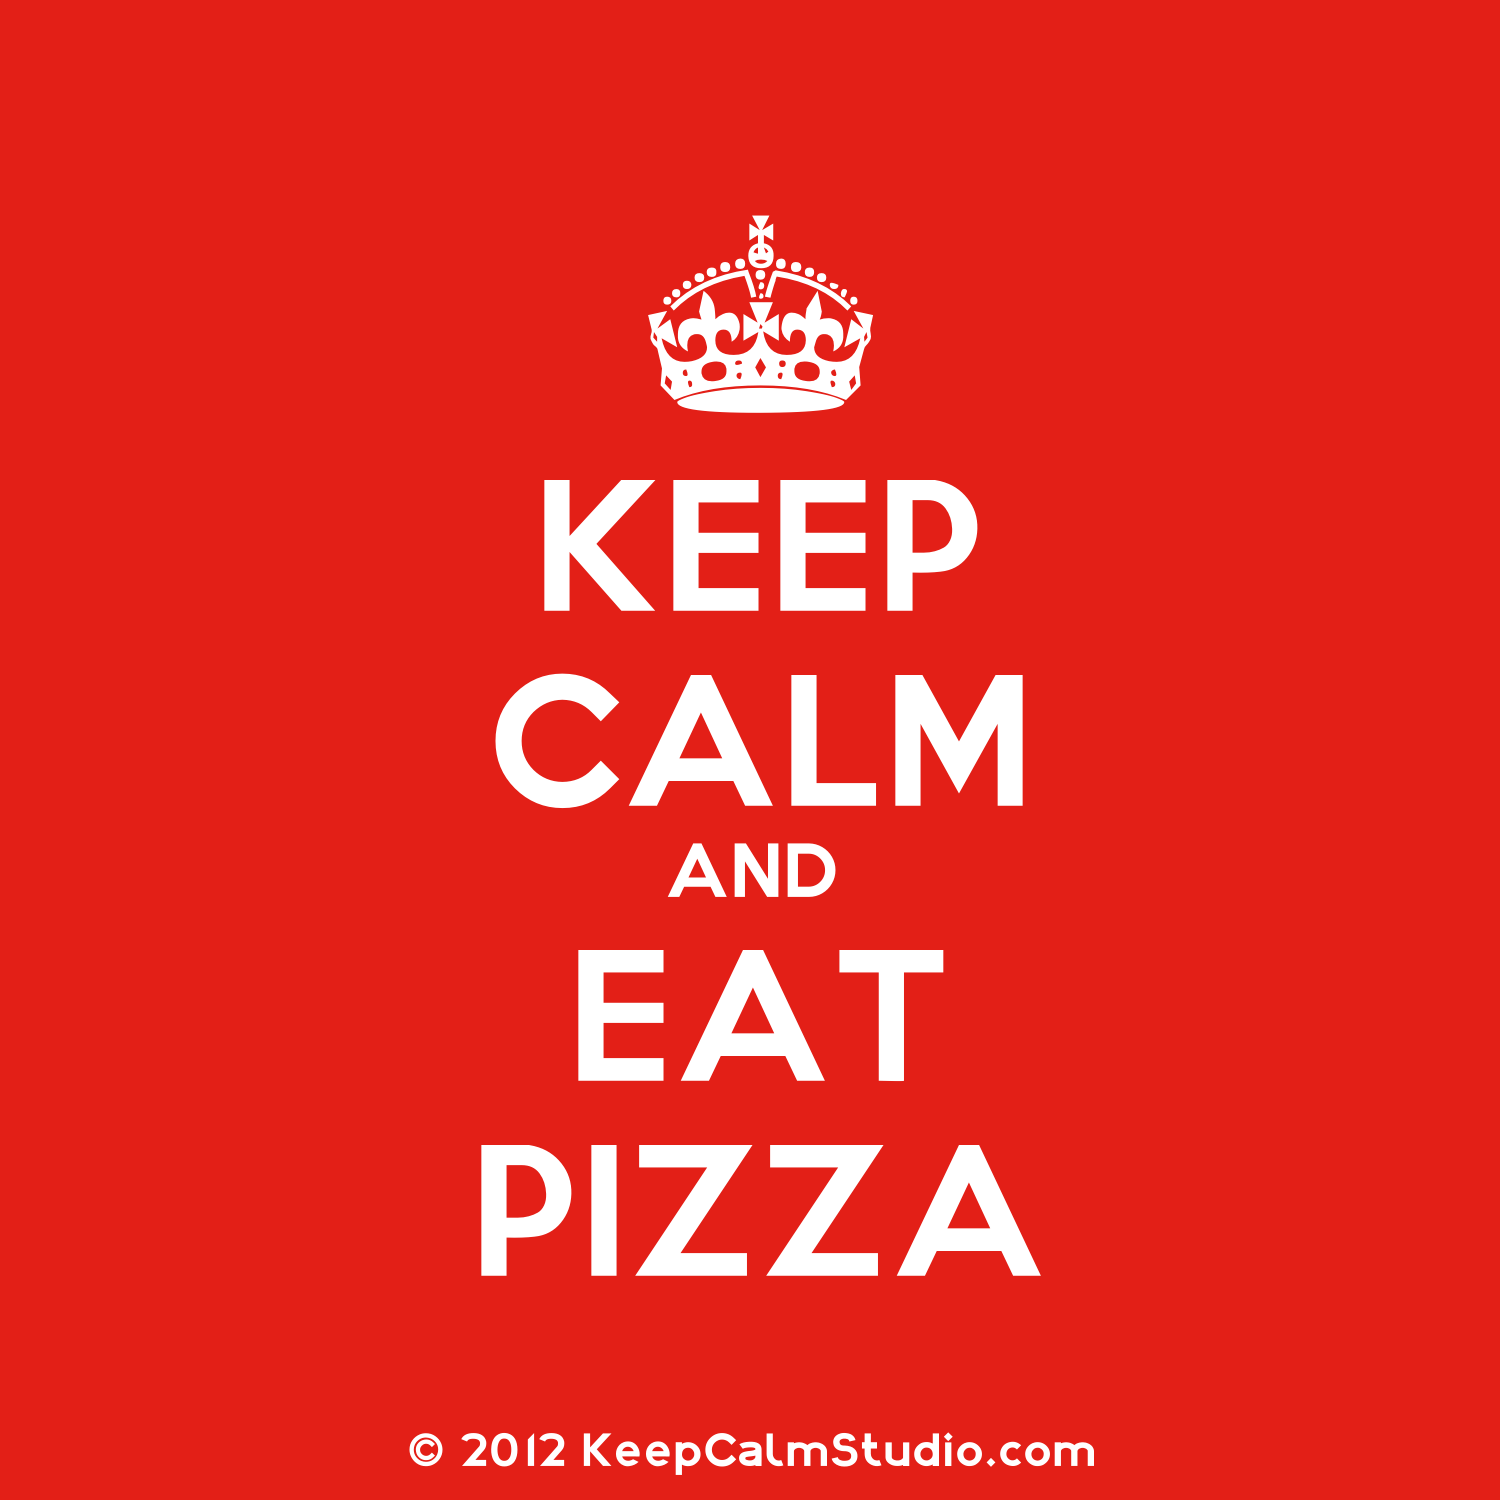 Keep Calm. Keep Calm And Eat Pizza' Design On T Shirt, Poster